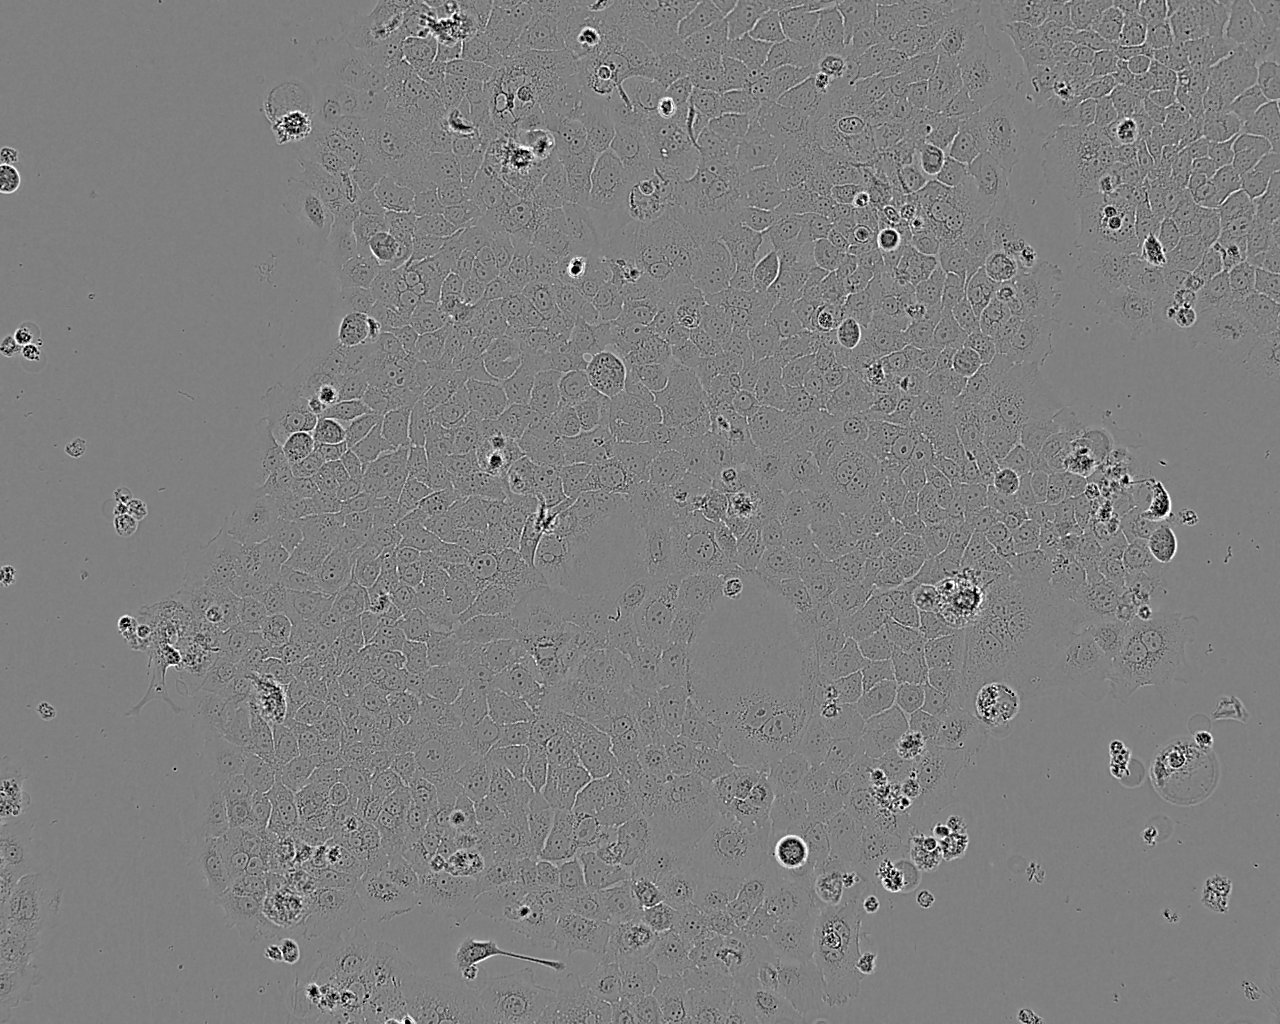 HEC-151 Cell:人子宫内膜癌细胞系,HEC-151 Cell